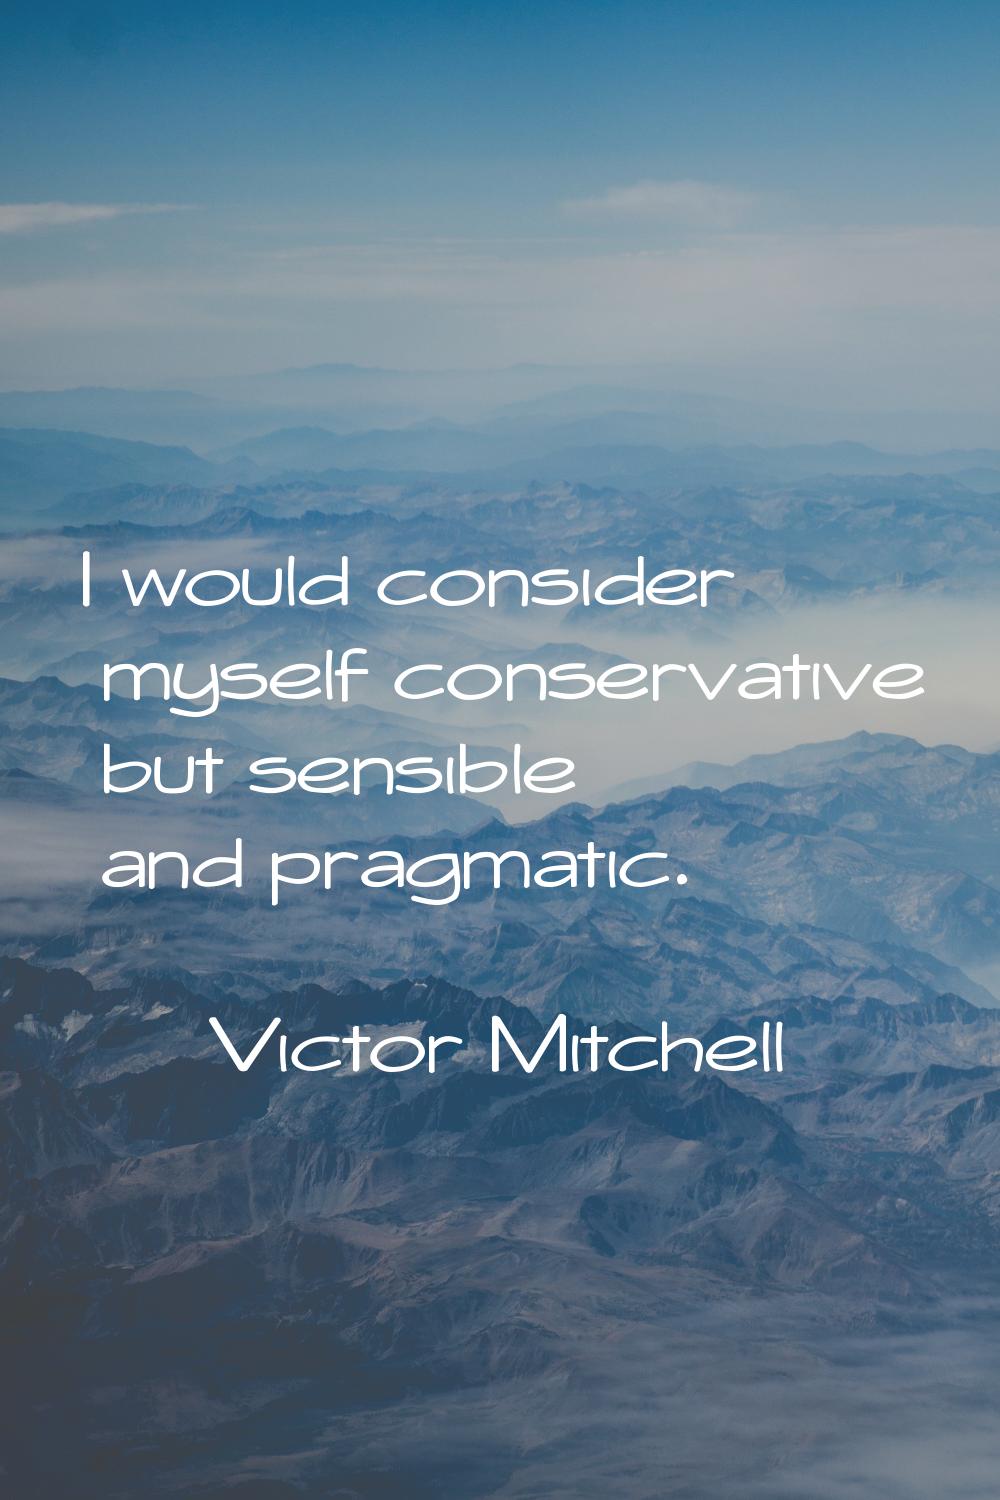 I would consider myself conservative but sensible and pragmatic.